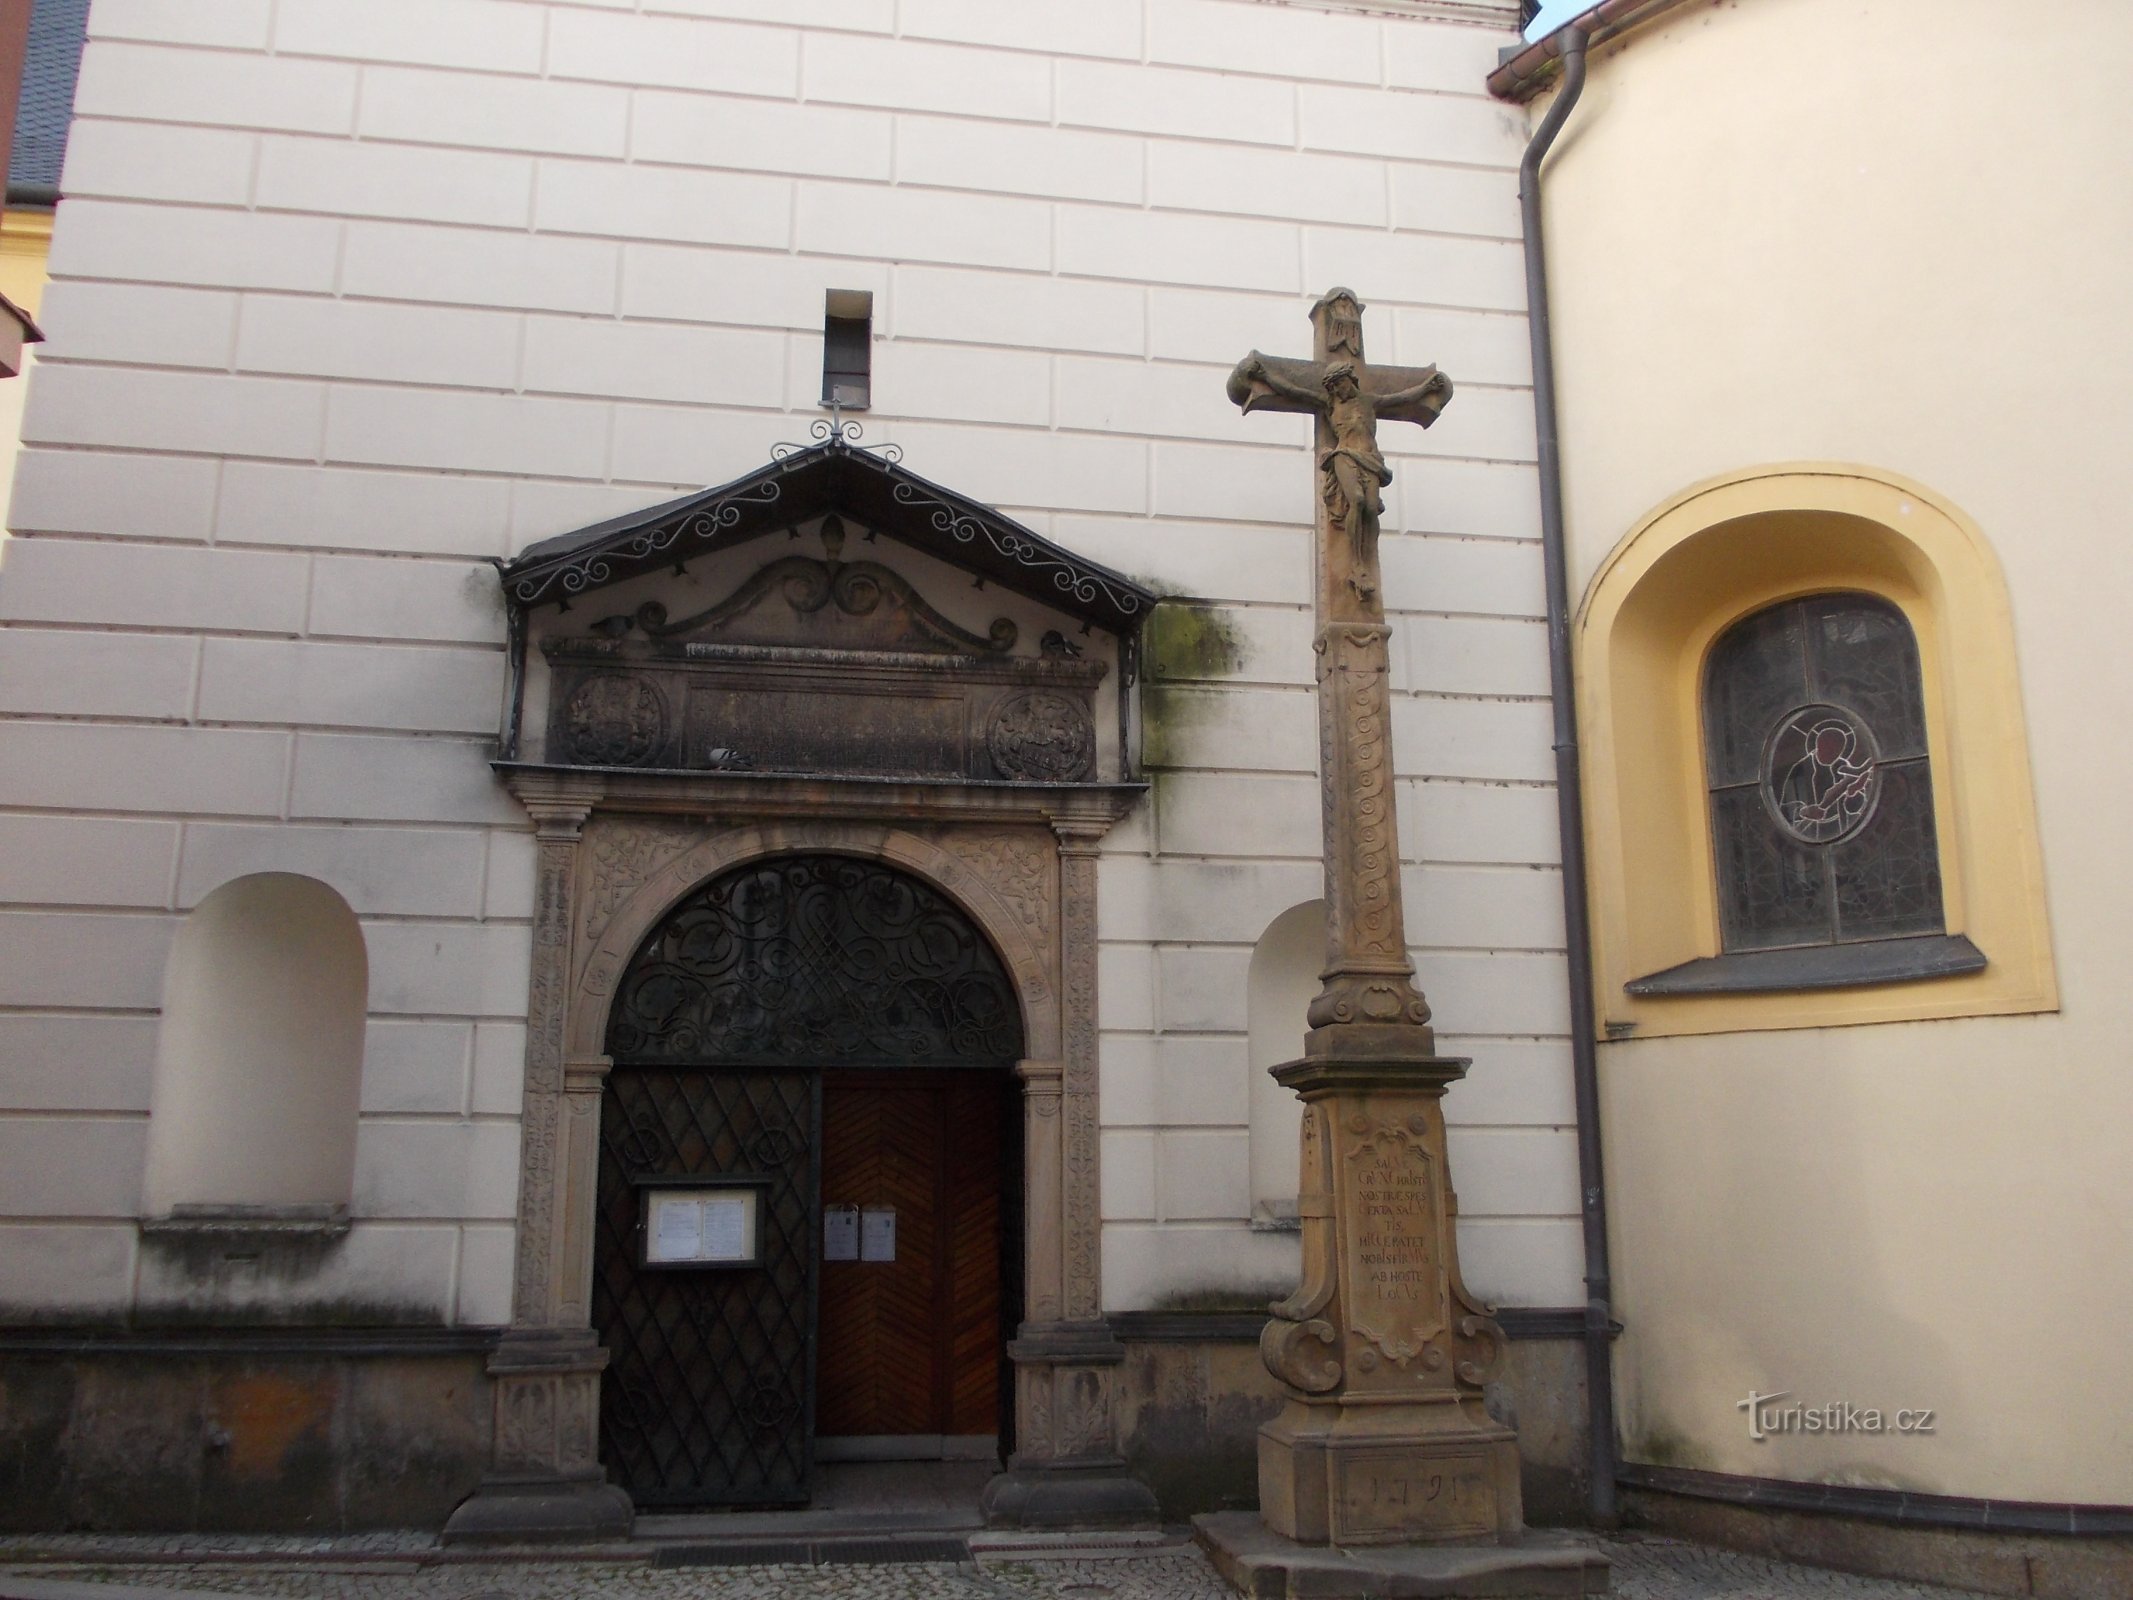 entrance to the church with a cross